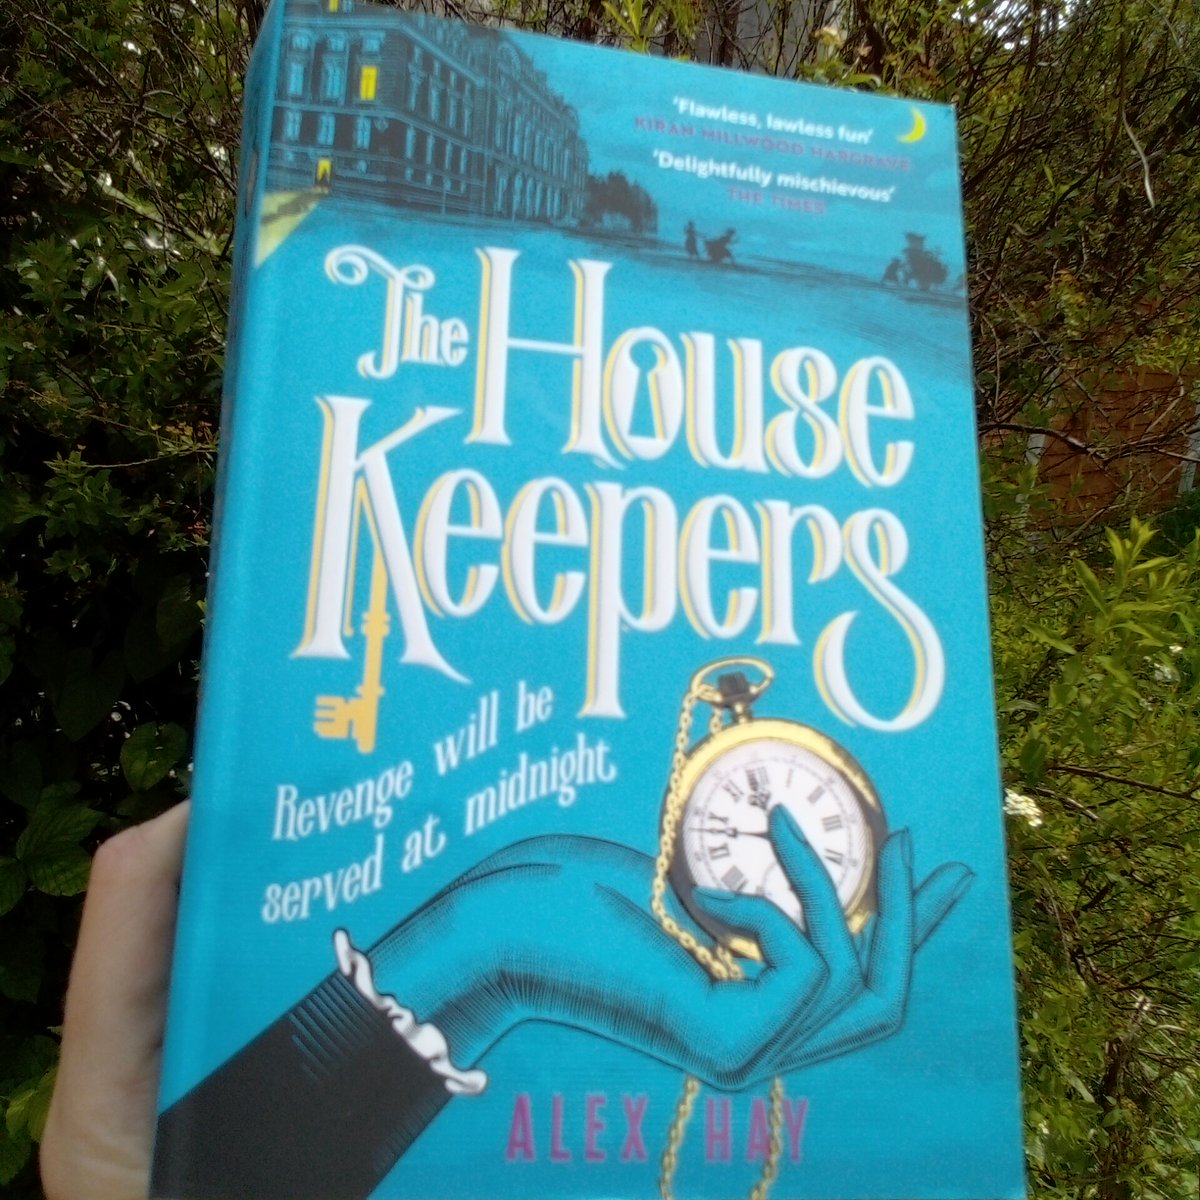 I'm loving The House Keepers by @AlexHayBooks . This book is funny and smart, with with a motley crew of roguish characters that I can't helo but to route for. I can't wait to find out how it all turns out.